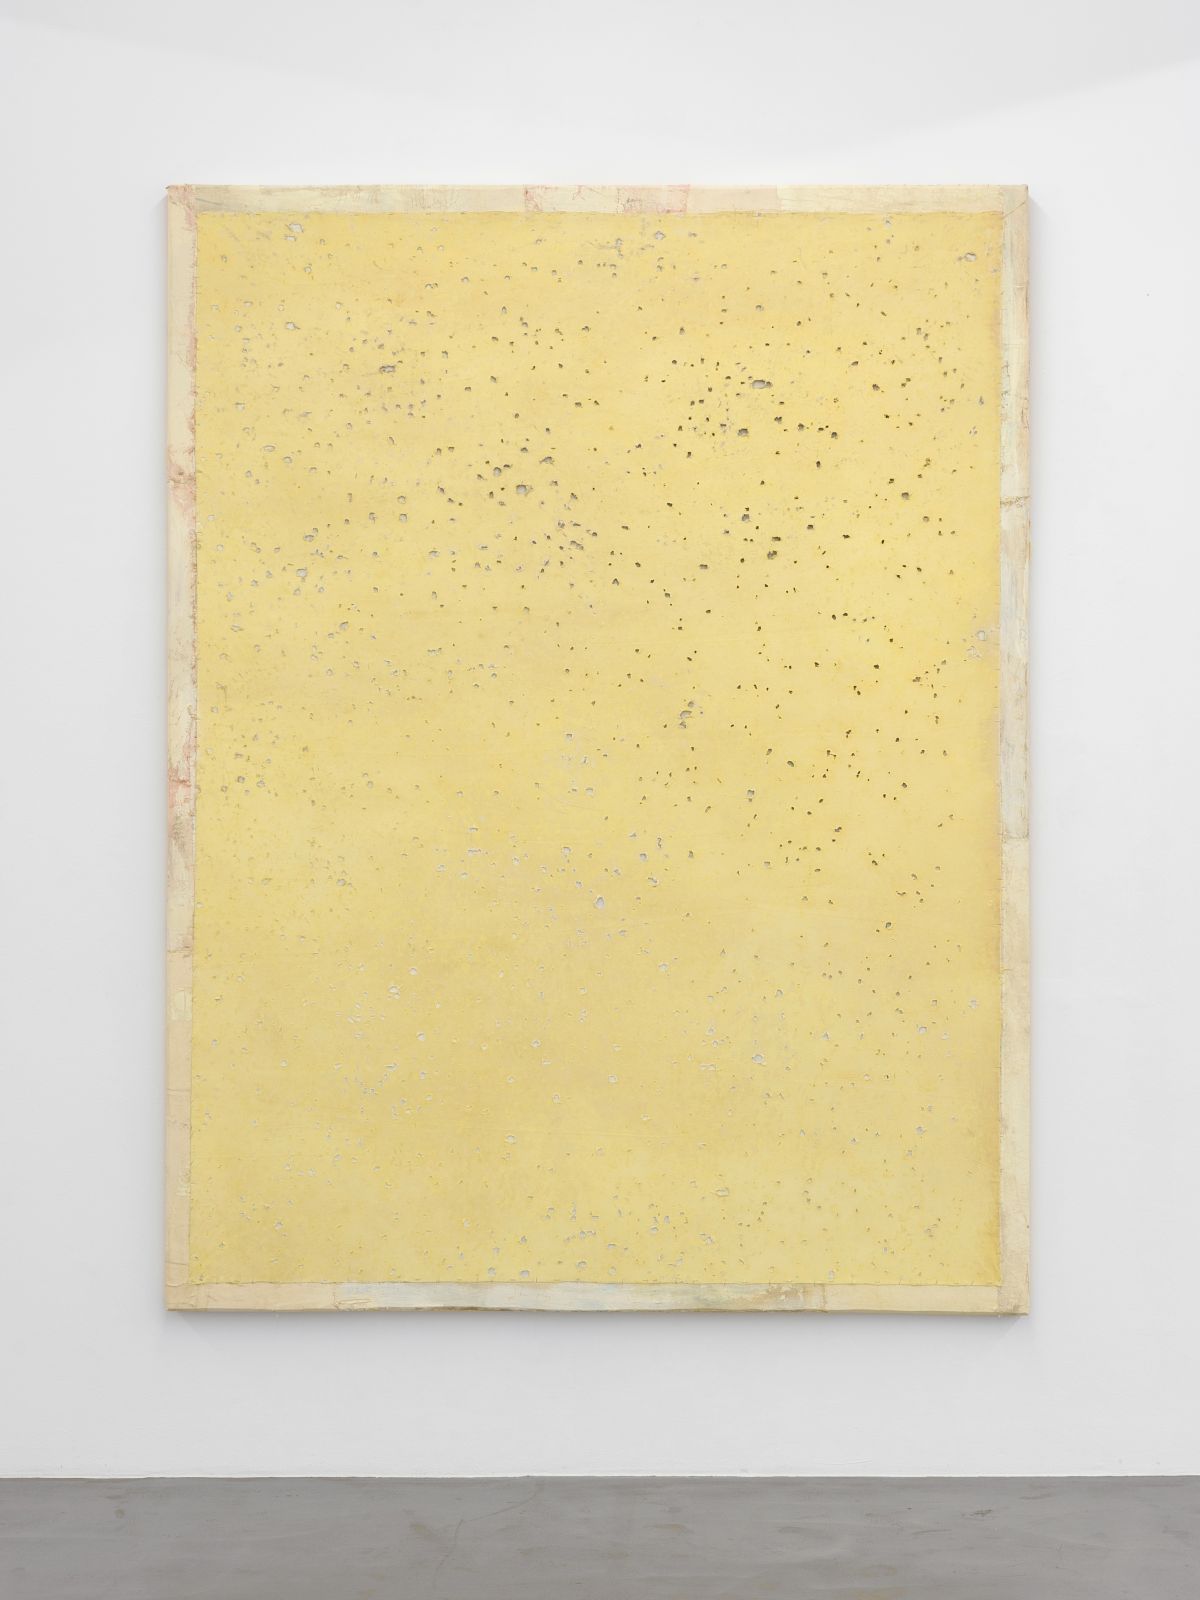 Lawrence Carroll, ‘Untitled (yellow painting)’, 2017, Oil, wax, staples, house paint, dust, canvas on wood